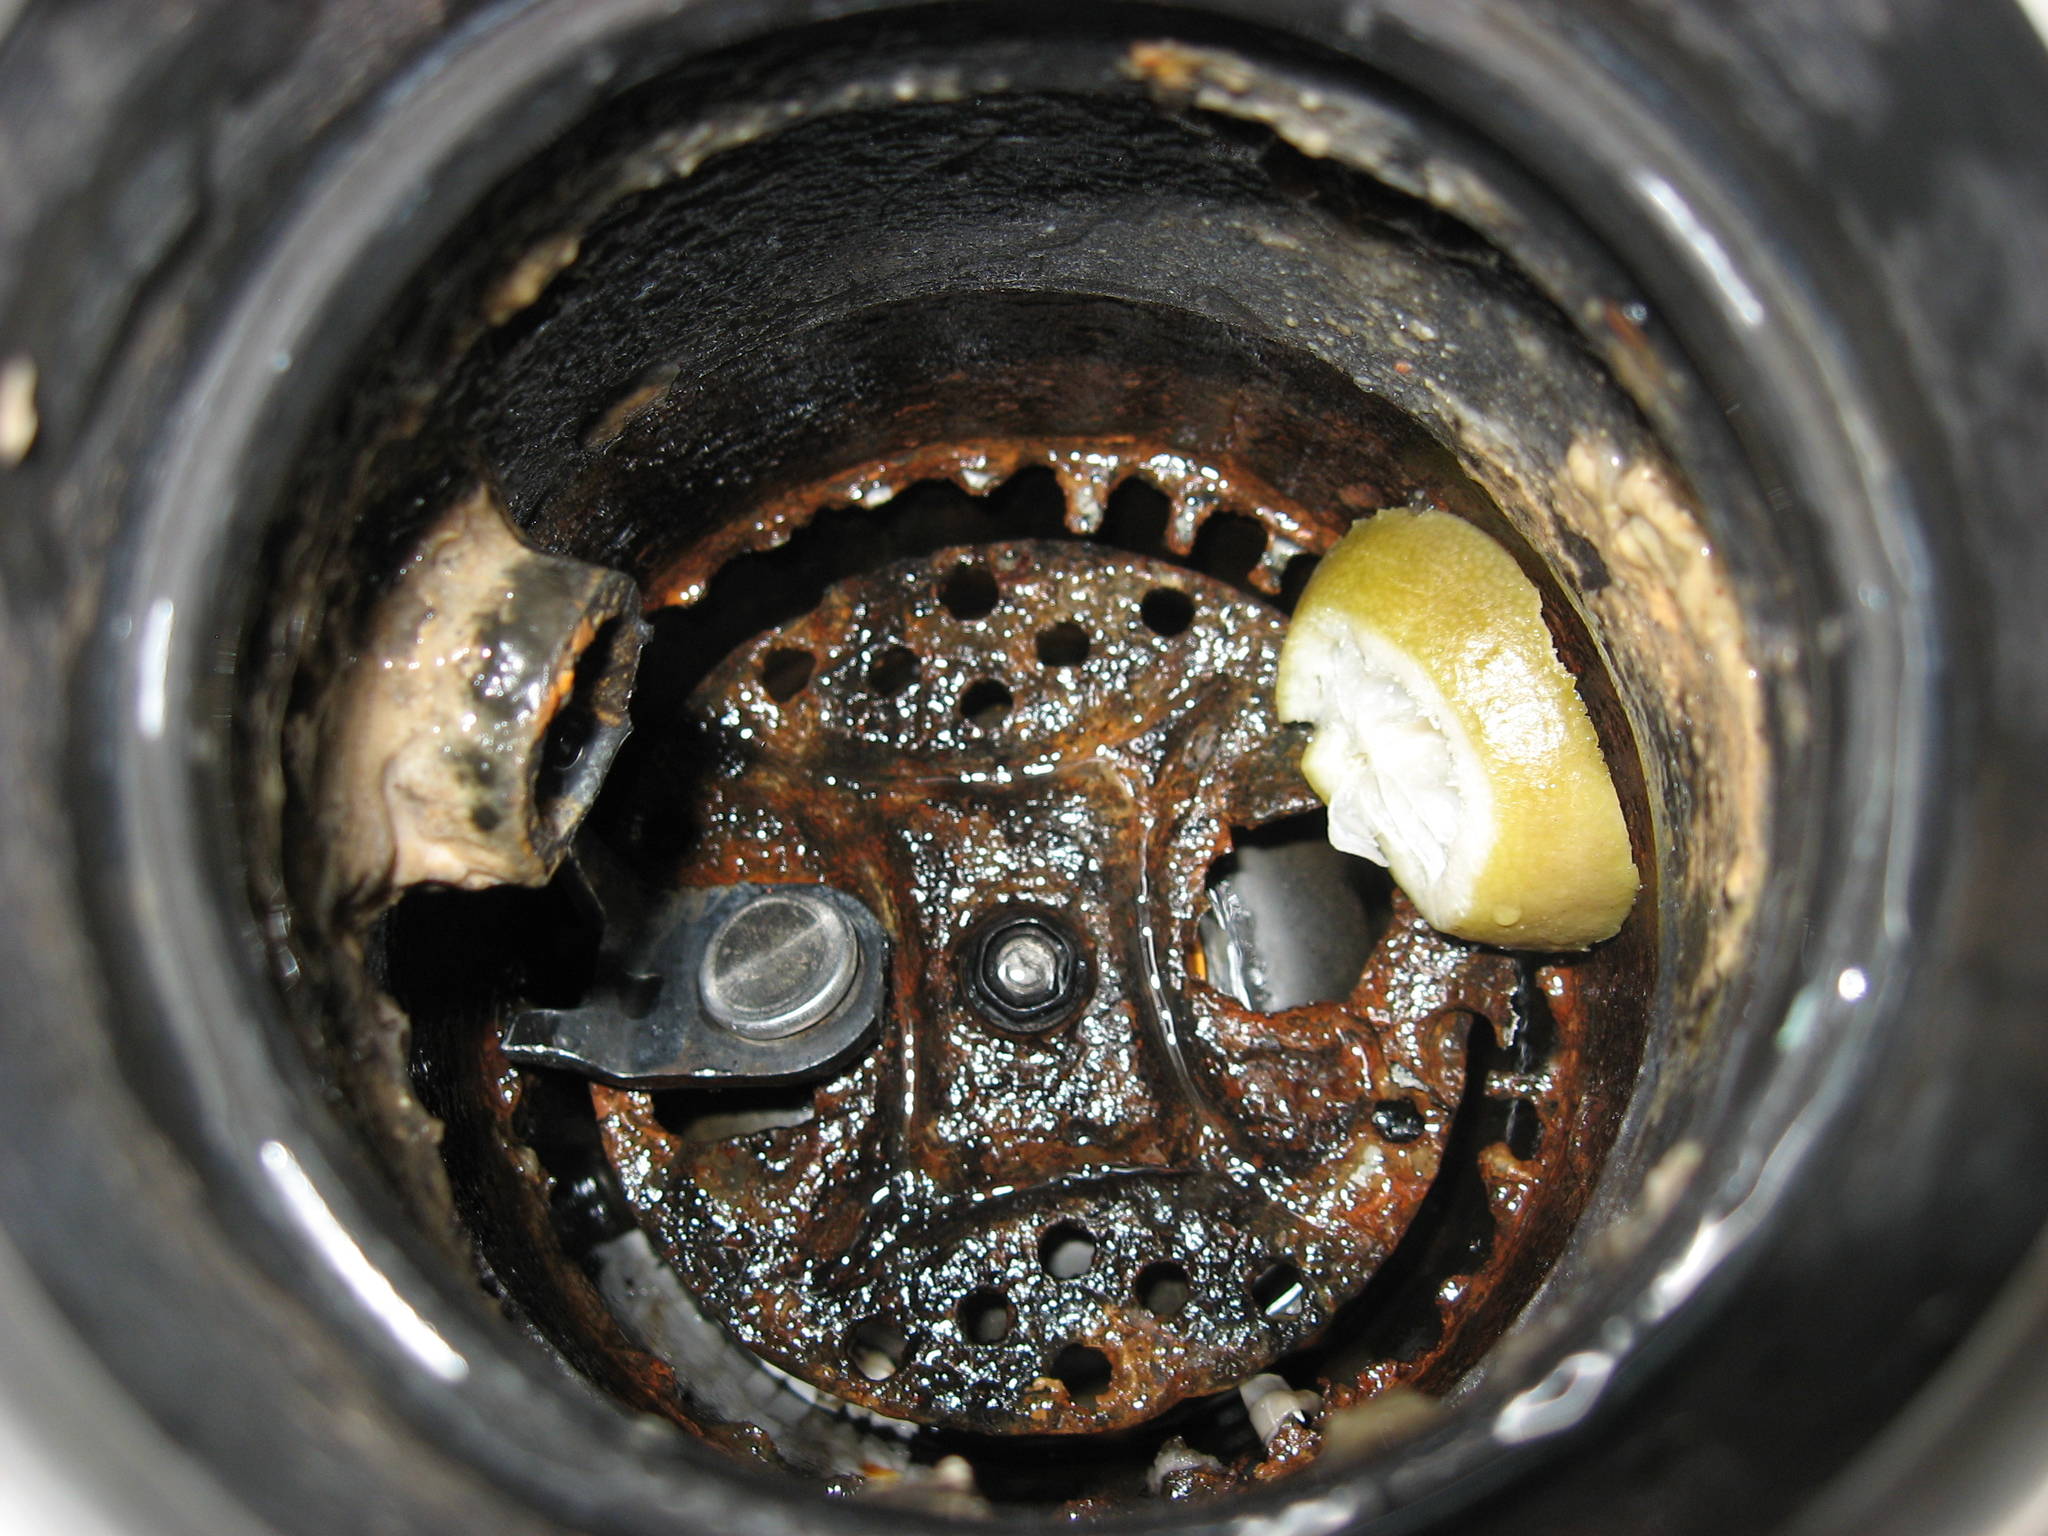 This photograph shows a heavily corroded garbage disposal, as seen from above. (Courtesy Photo/RTHardin)